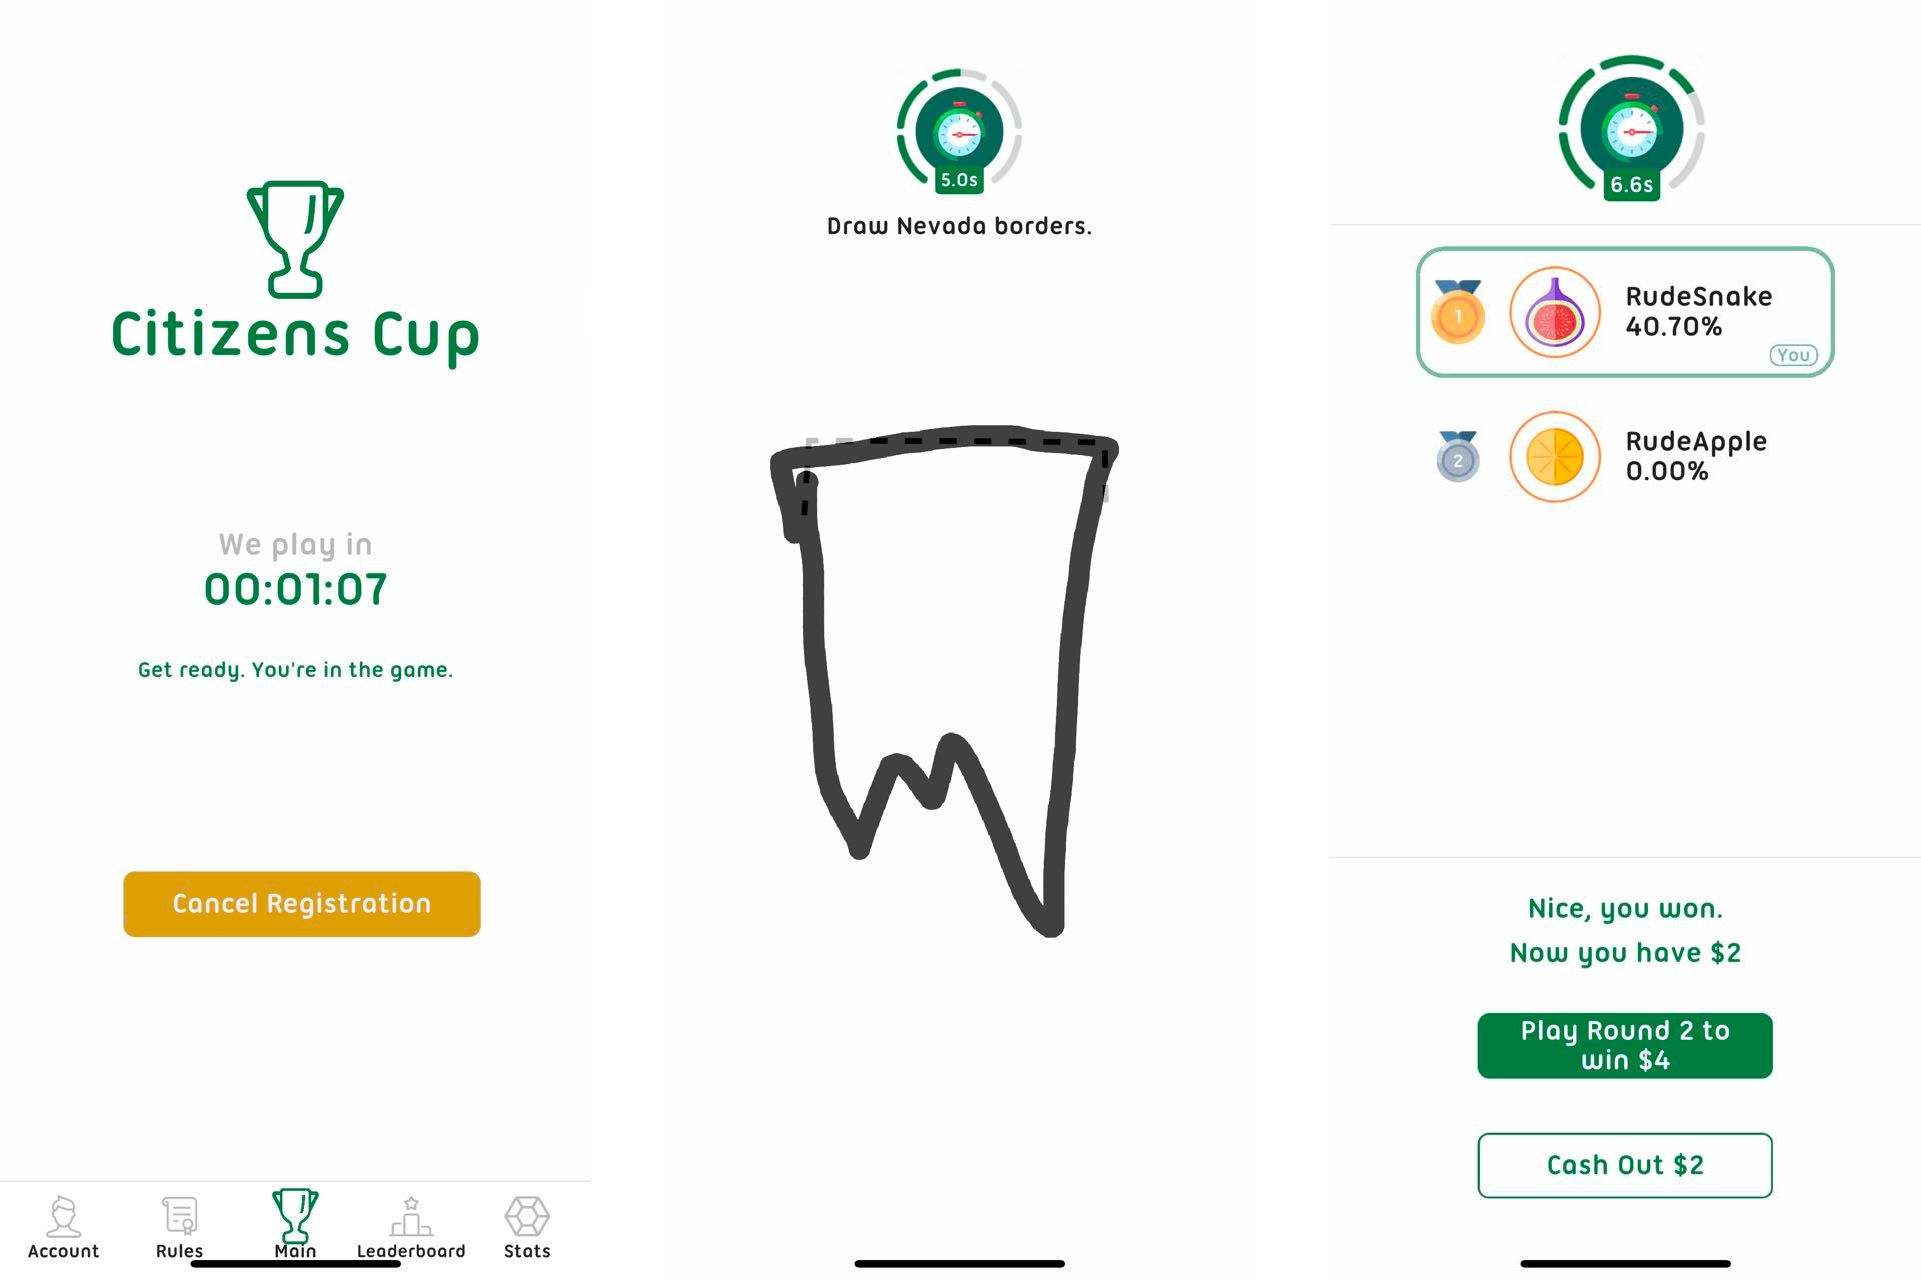 Citizens Cup